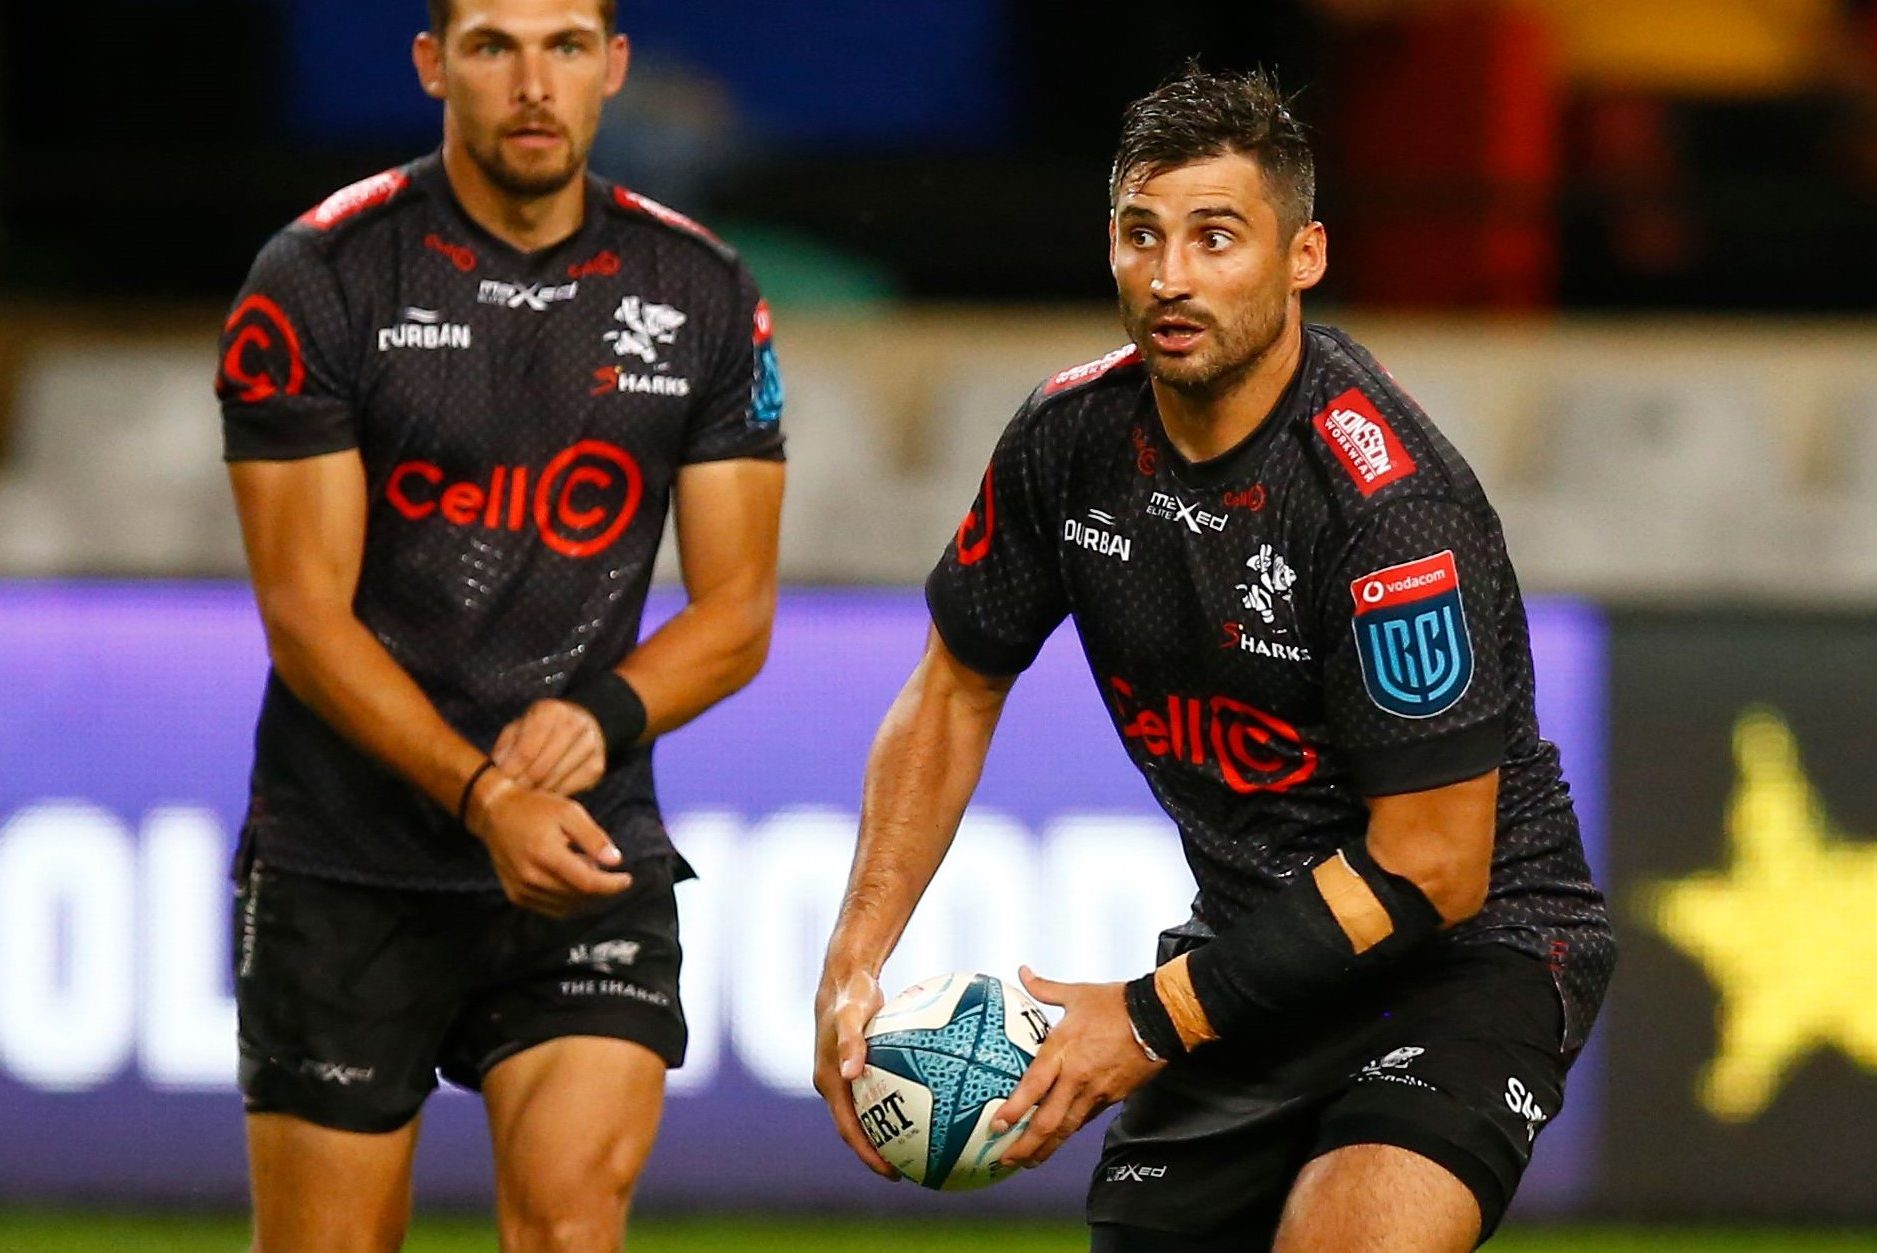 Mandatory Credit: Photo by Steve Haag/INPHO/Shutterstock/BackpagePix (13639544at) Cell C Sharks vs Cardiff Rugby . Cell C Sharks' Lionel Cronje BKT United Rugby Championship, Hollywoodbets Kings Park, Durban, South Africa - 27 Nov 2022